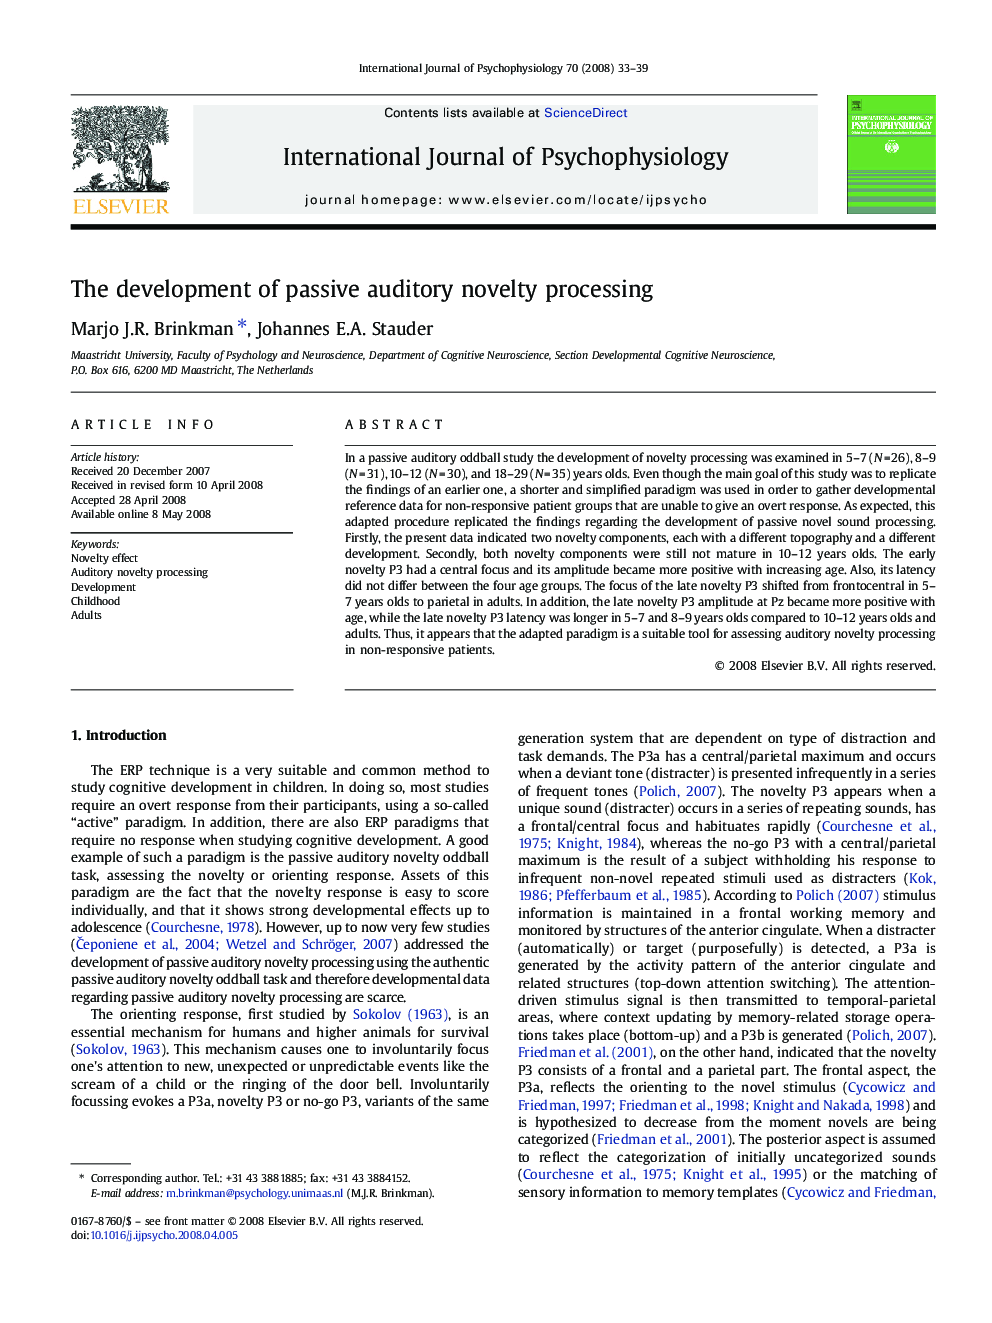 The development of passive auditory novelty processing